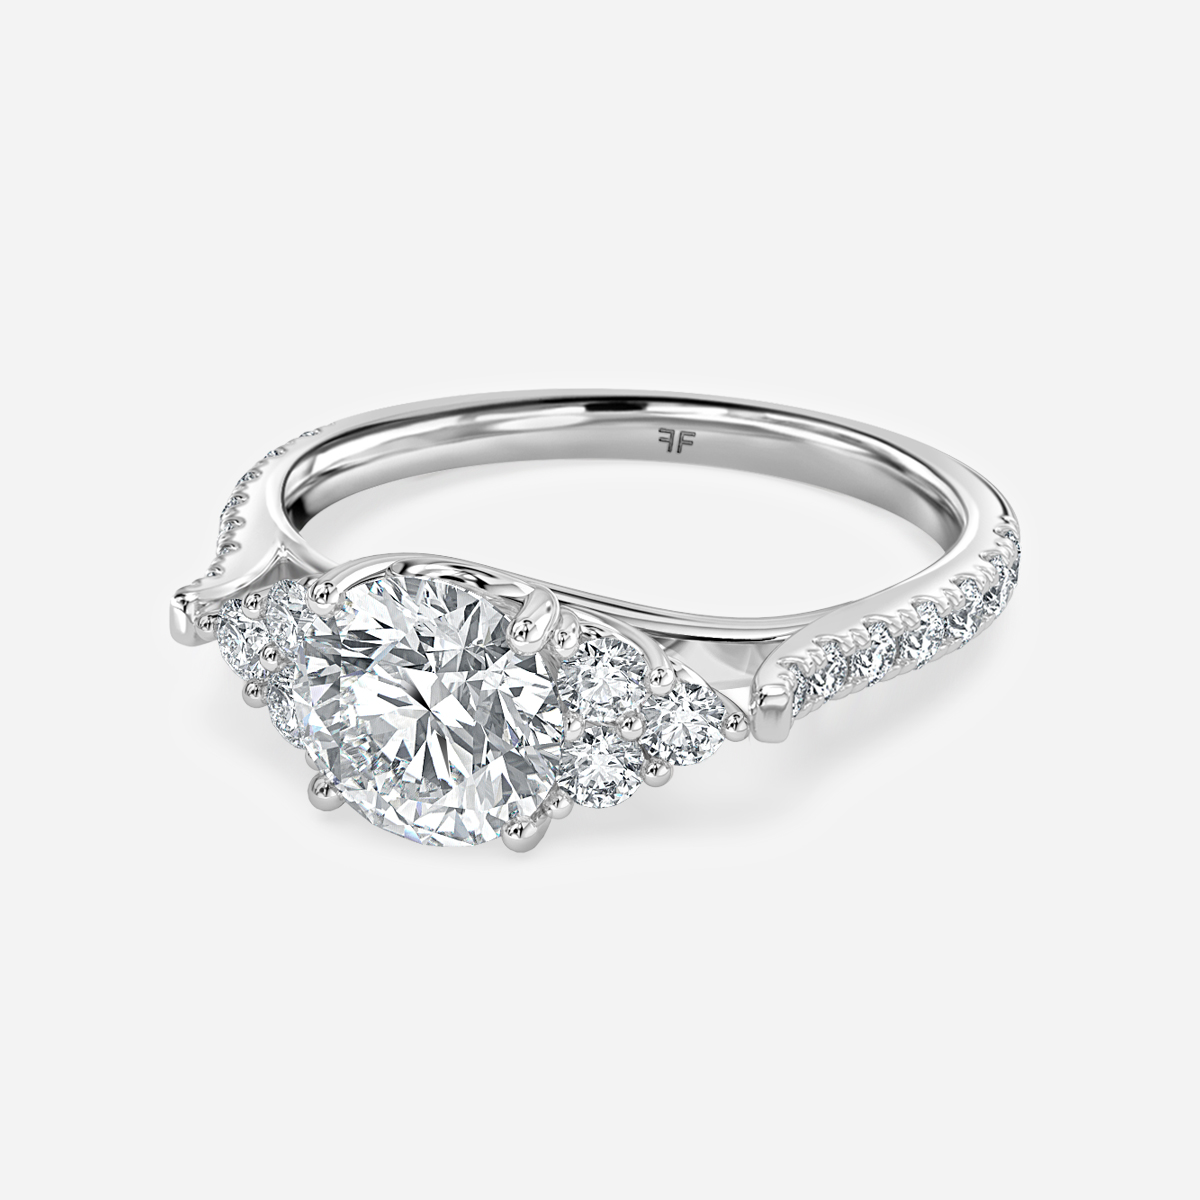 Mithrial White Gold Trilogy Engagement Ring